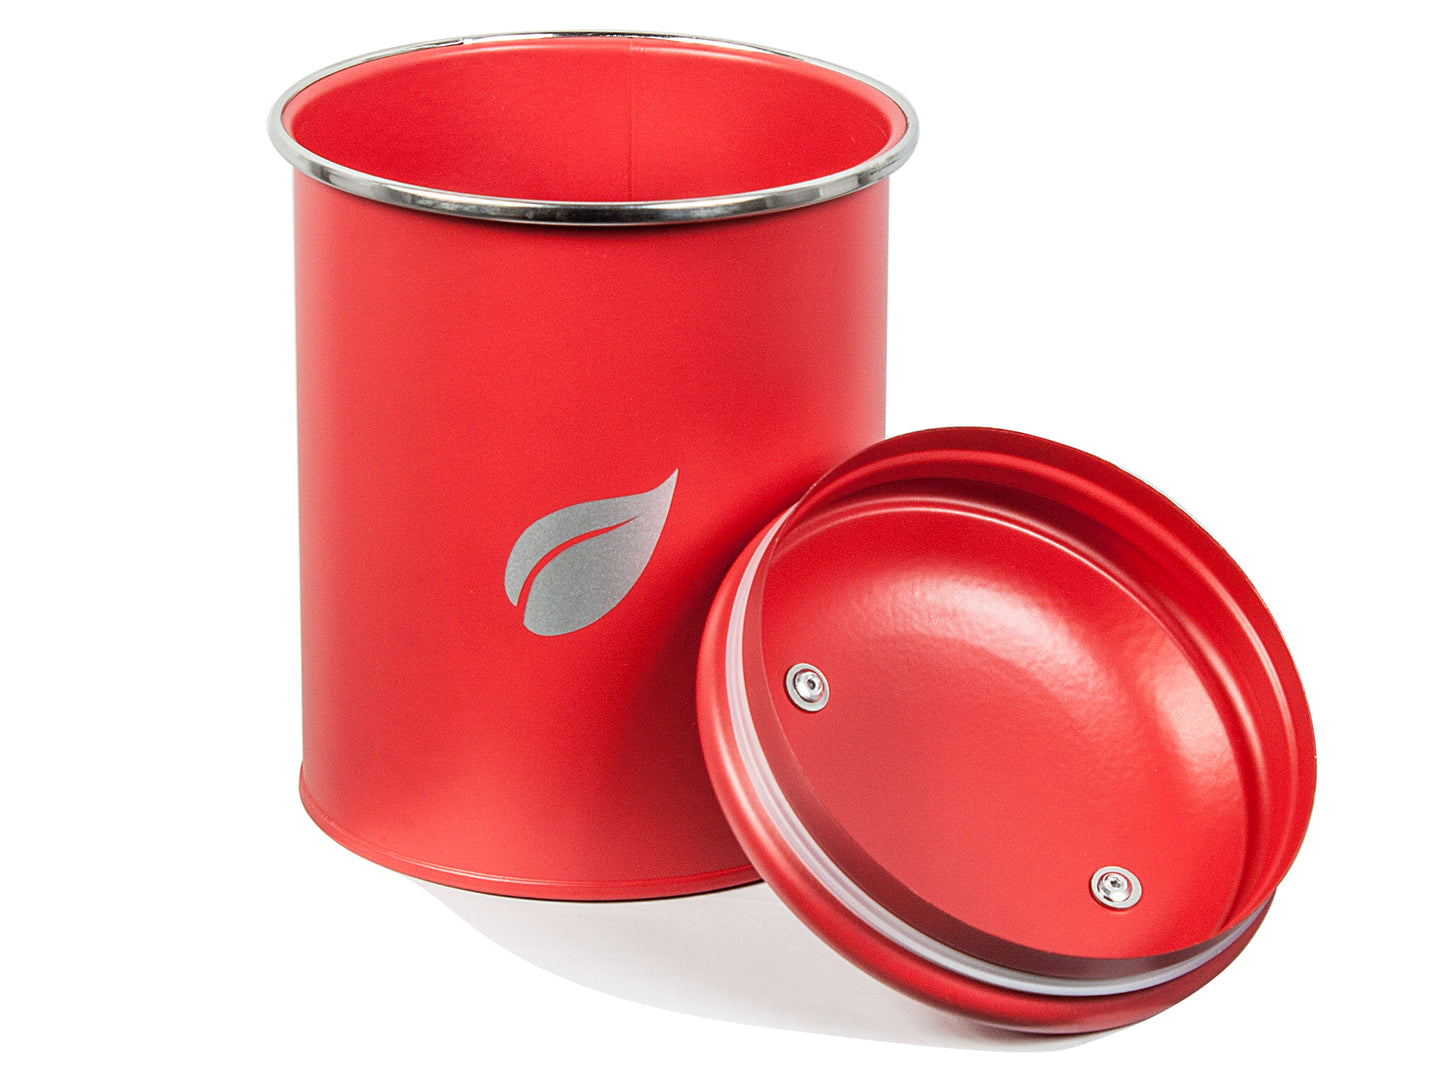 Saf-Care Kitchen Canisters - Modern Kitchen Decoration of Canister Set with Multiple Preservation Purposes by Tight Sealed Lids, Set of 3, Valentine Red, Model-SC-002-Red